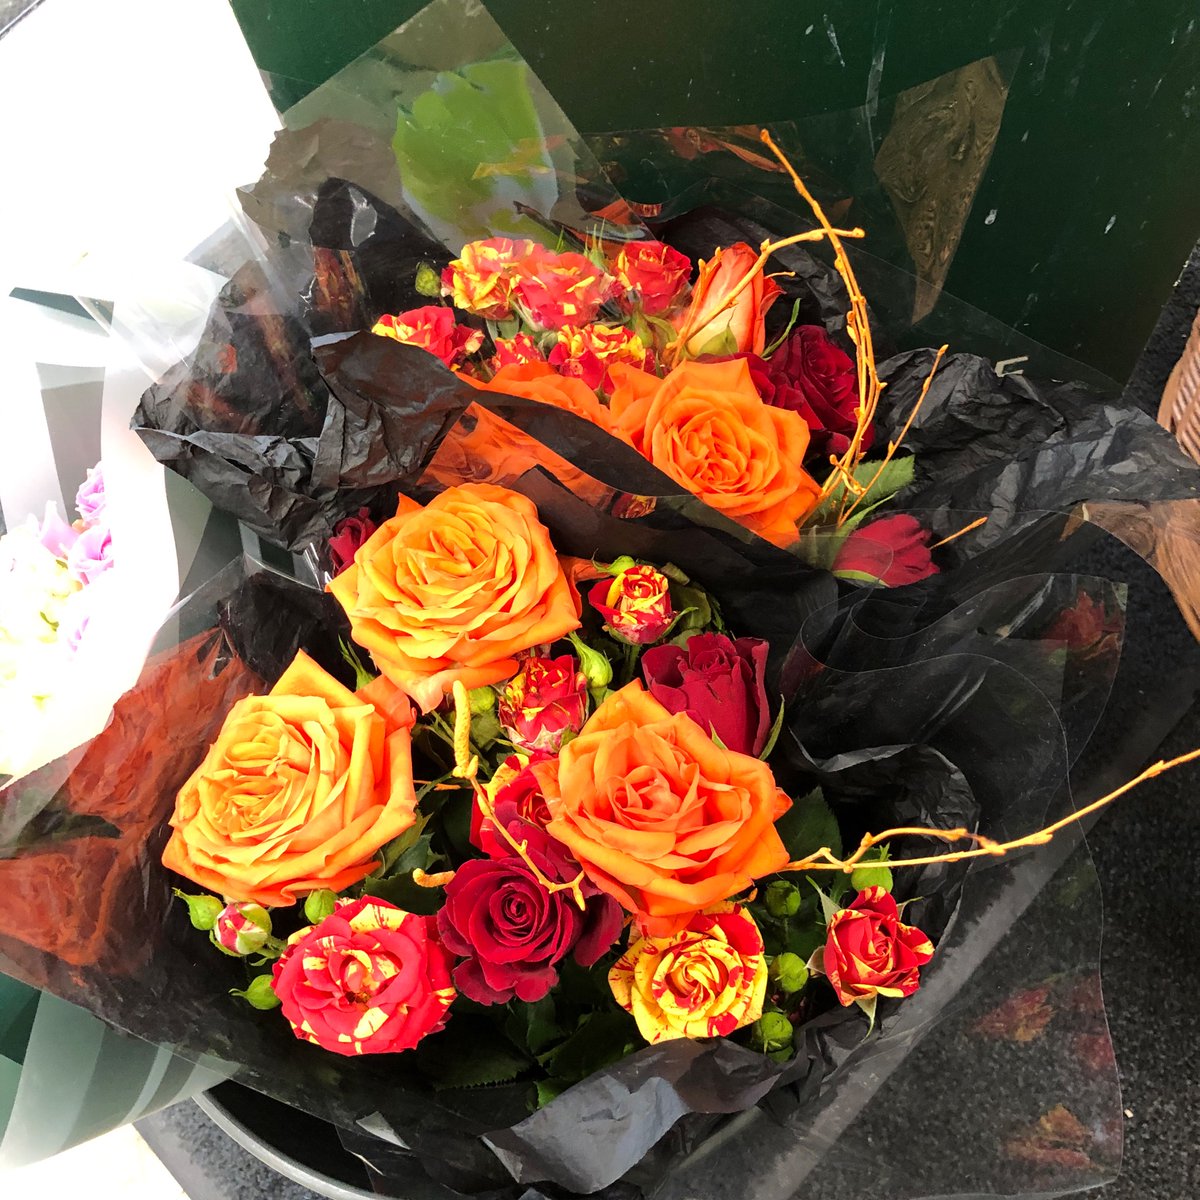 WAITROSE HALLOWEEN ROSESRoses represent romantic love and there’s nothing scarier than that /5